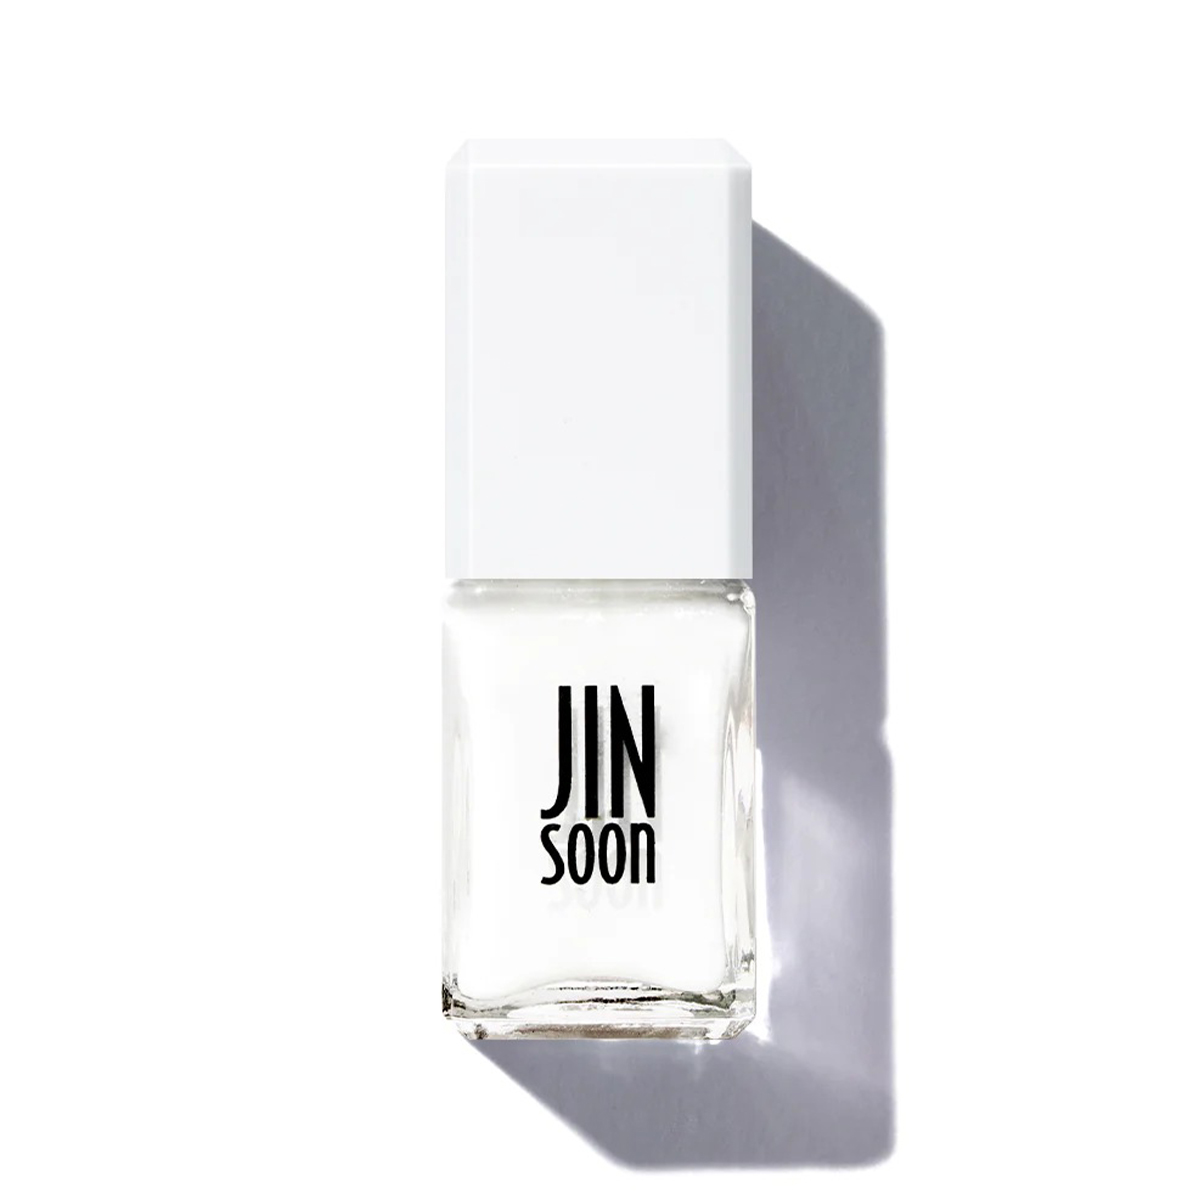 JinSoon Nail Polish in Absolute White